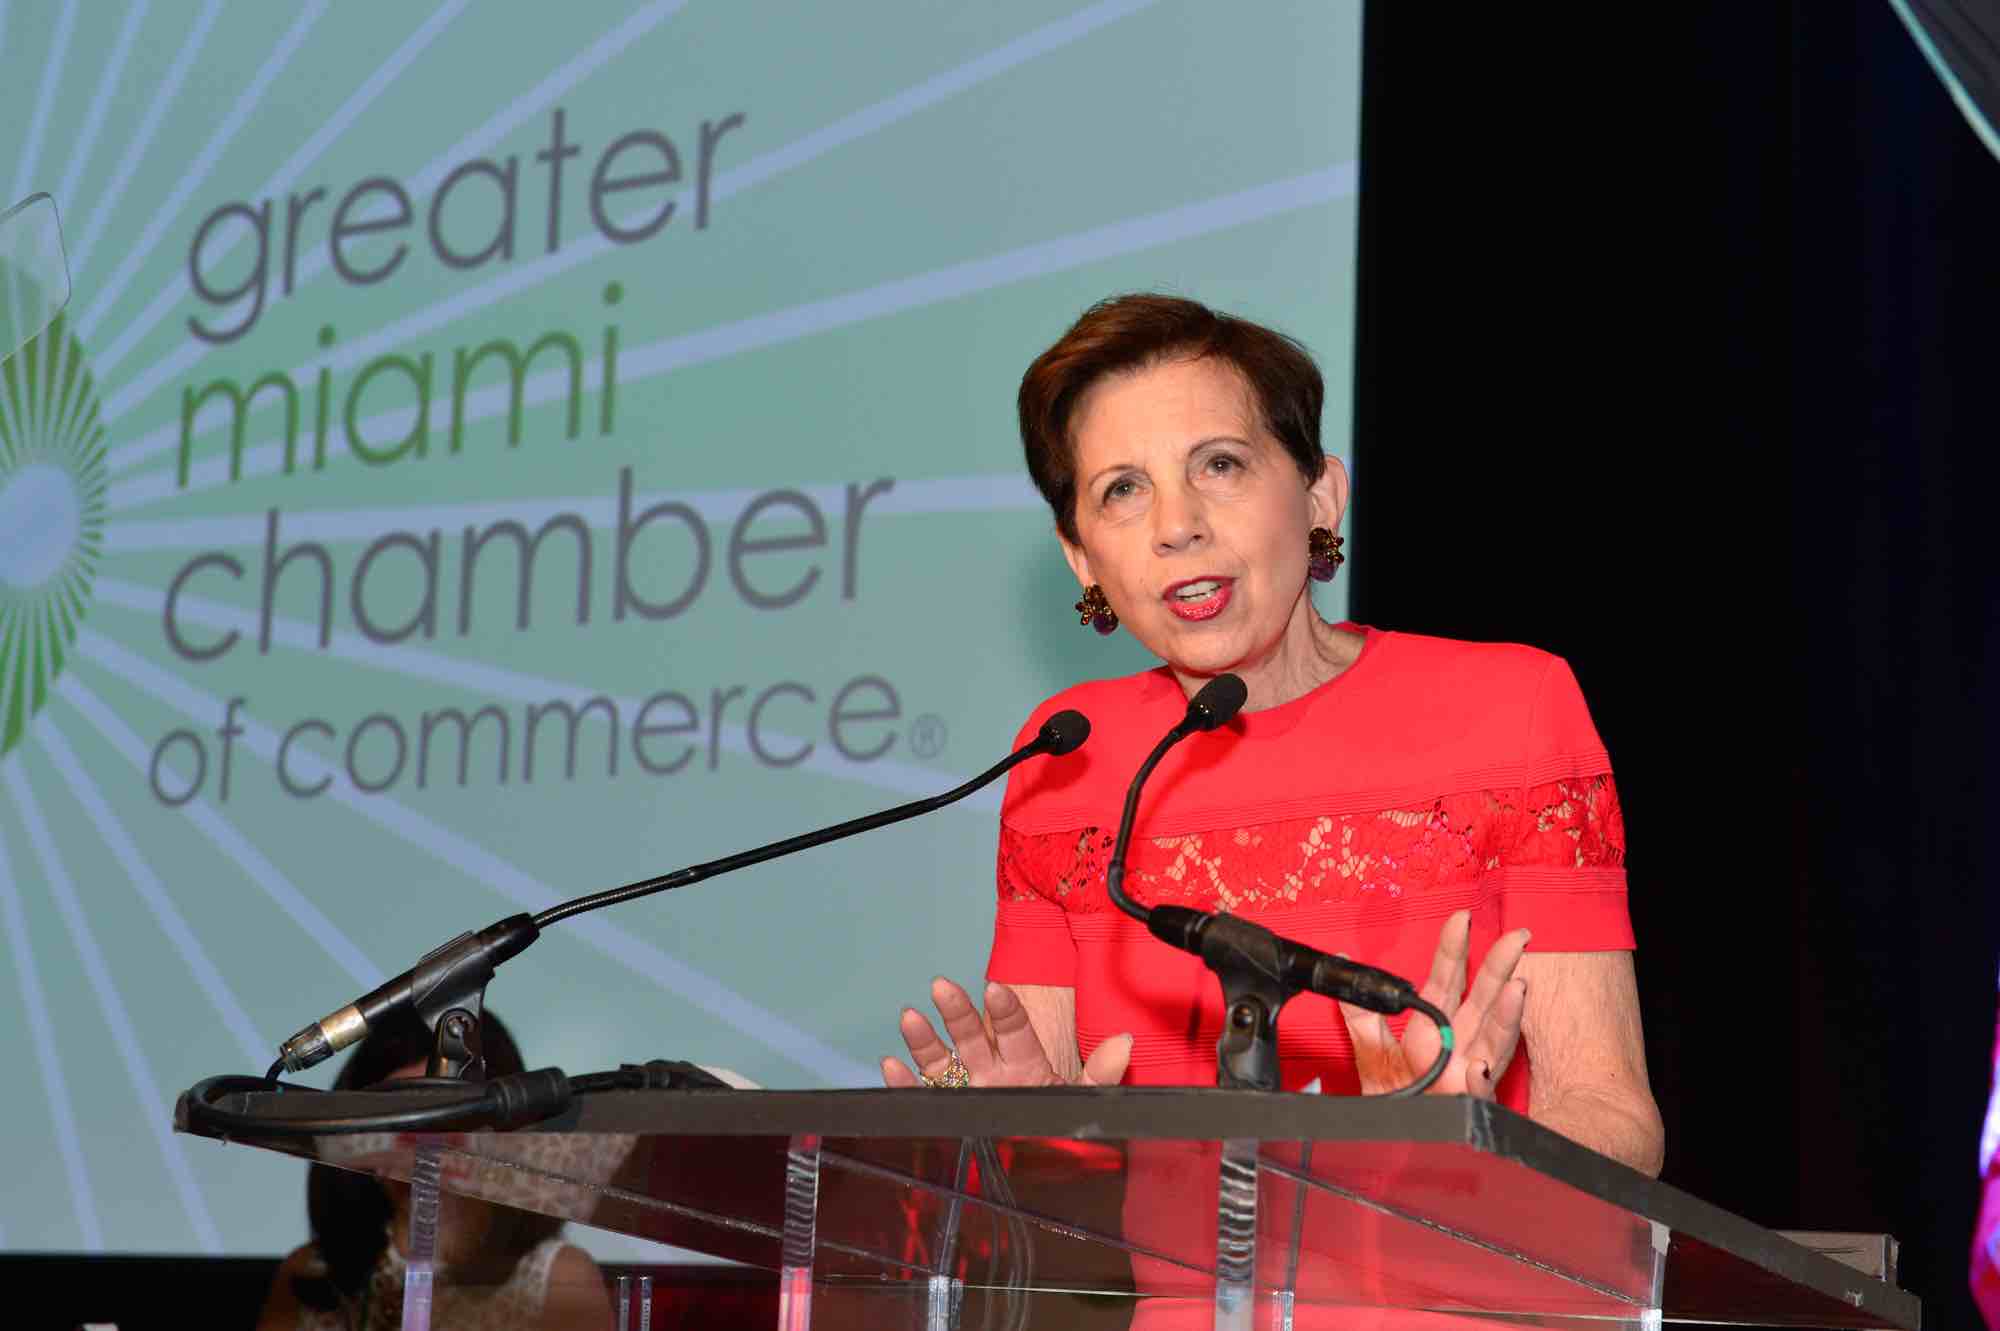 Powerful women like Adrienne Arsht use their influence in local and national issues